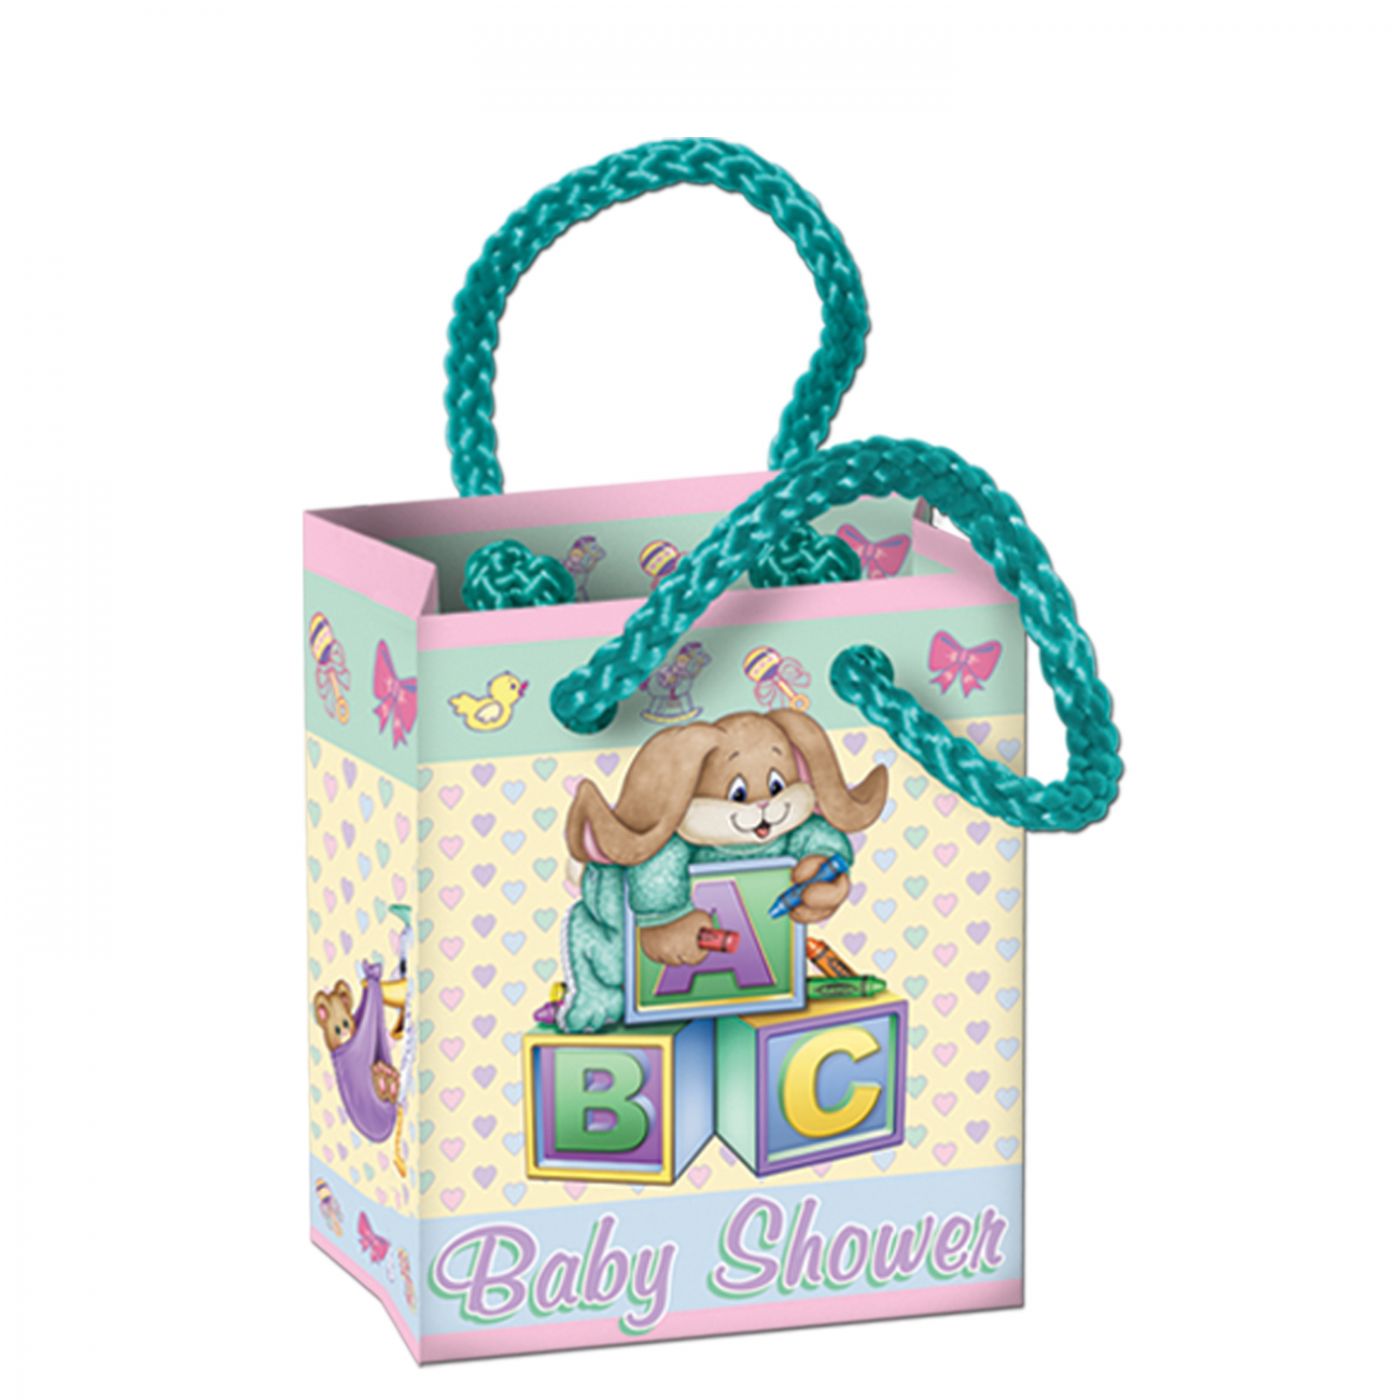 Cuddle-Time Mini Gift Bag Party Favors image